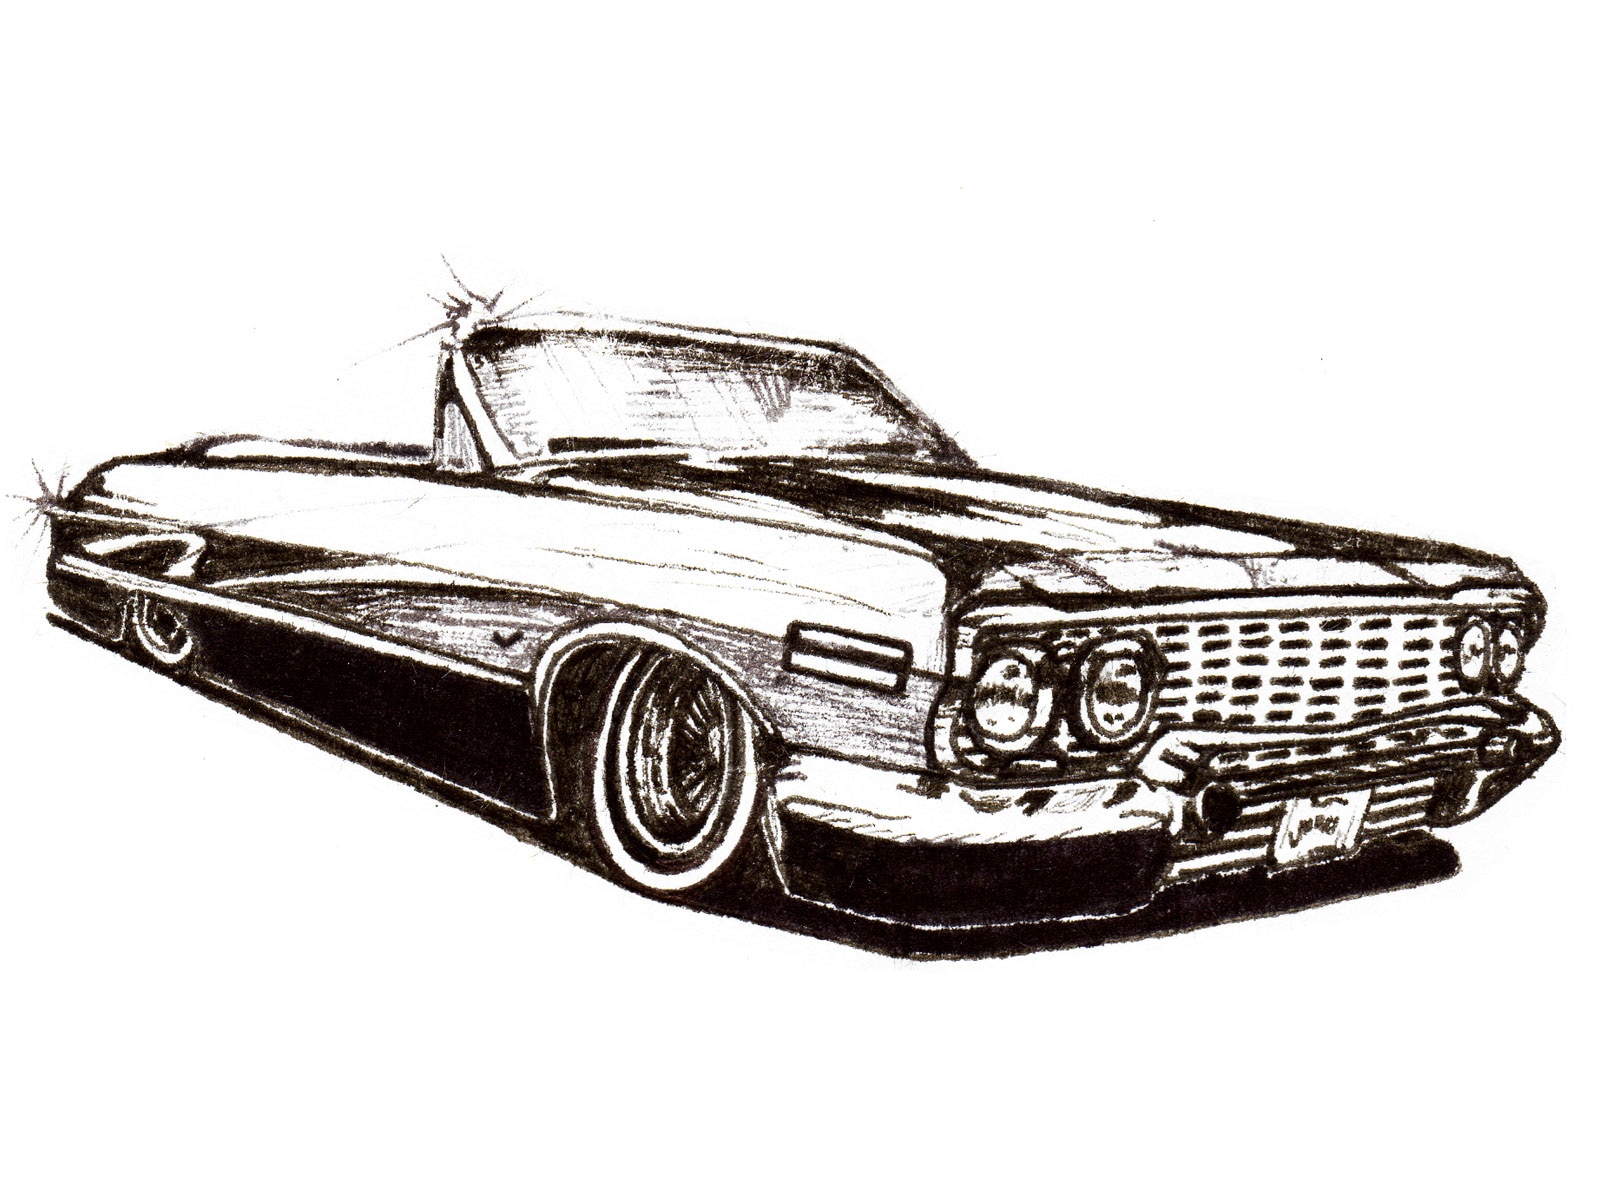 275. drawing images for 'Lowrider'. 